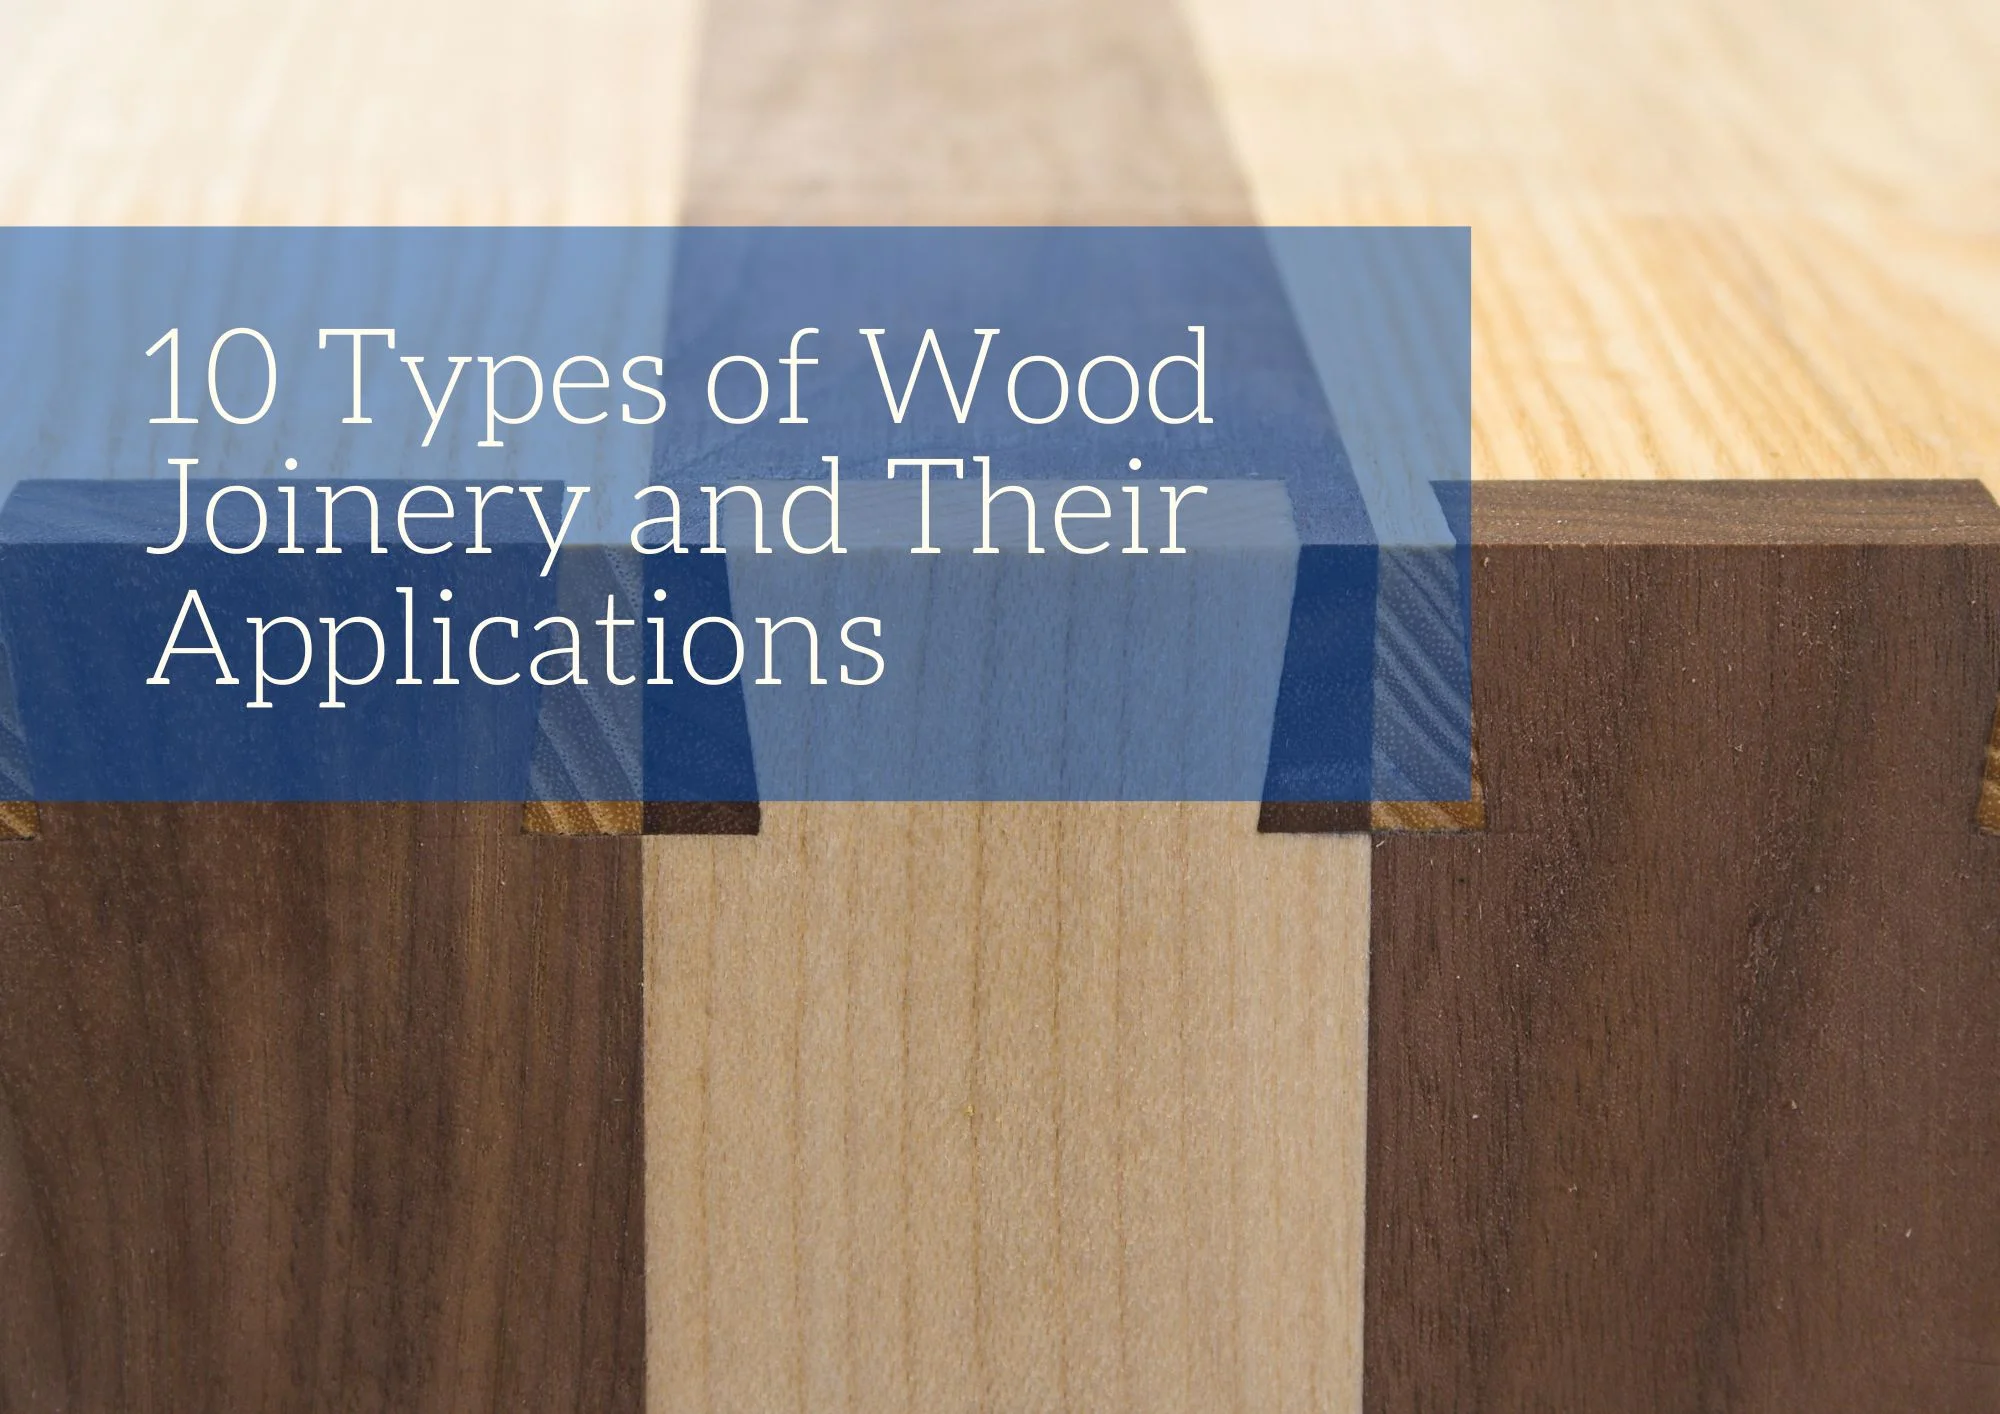 10 Types of Wood Joinery and Their Applications